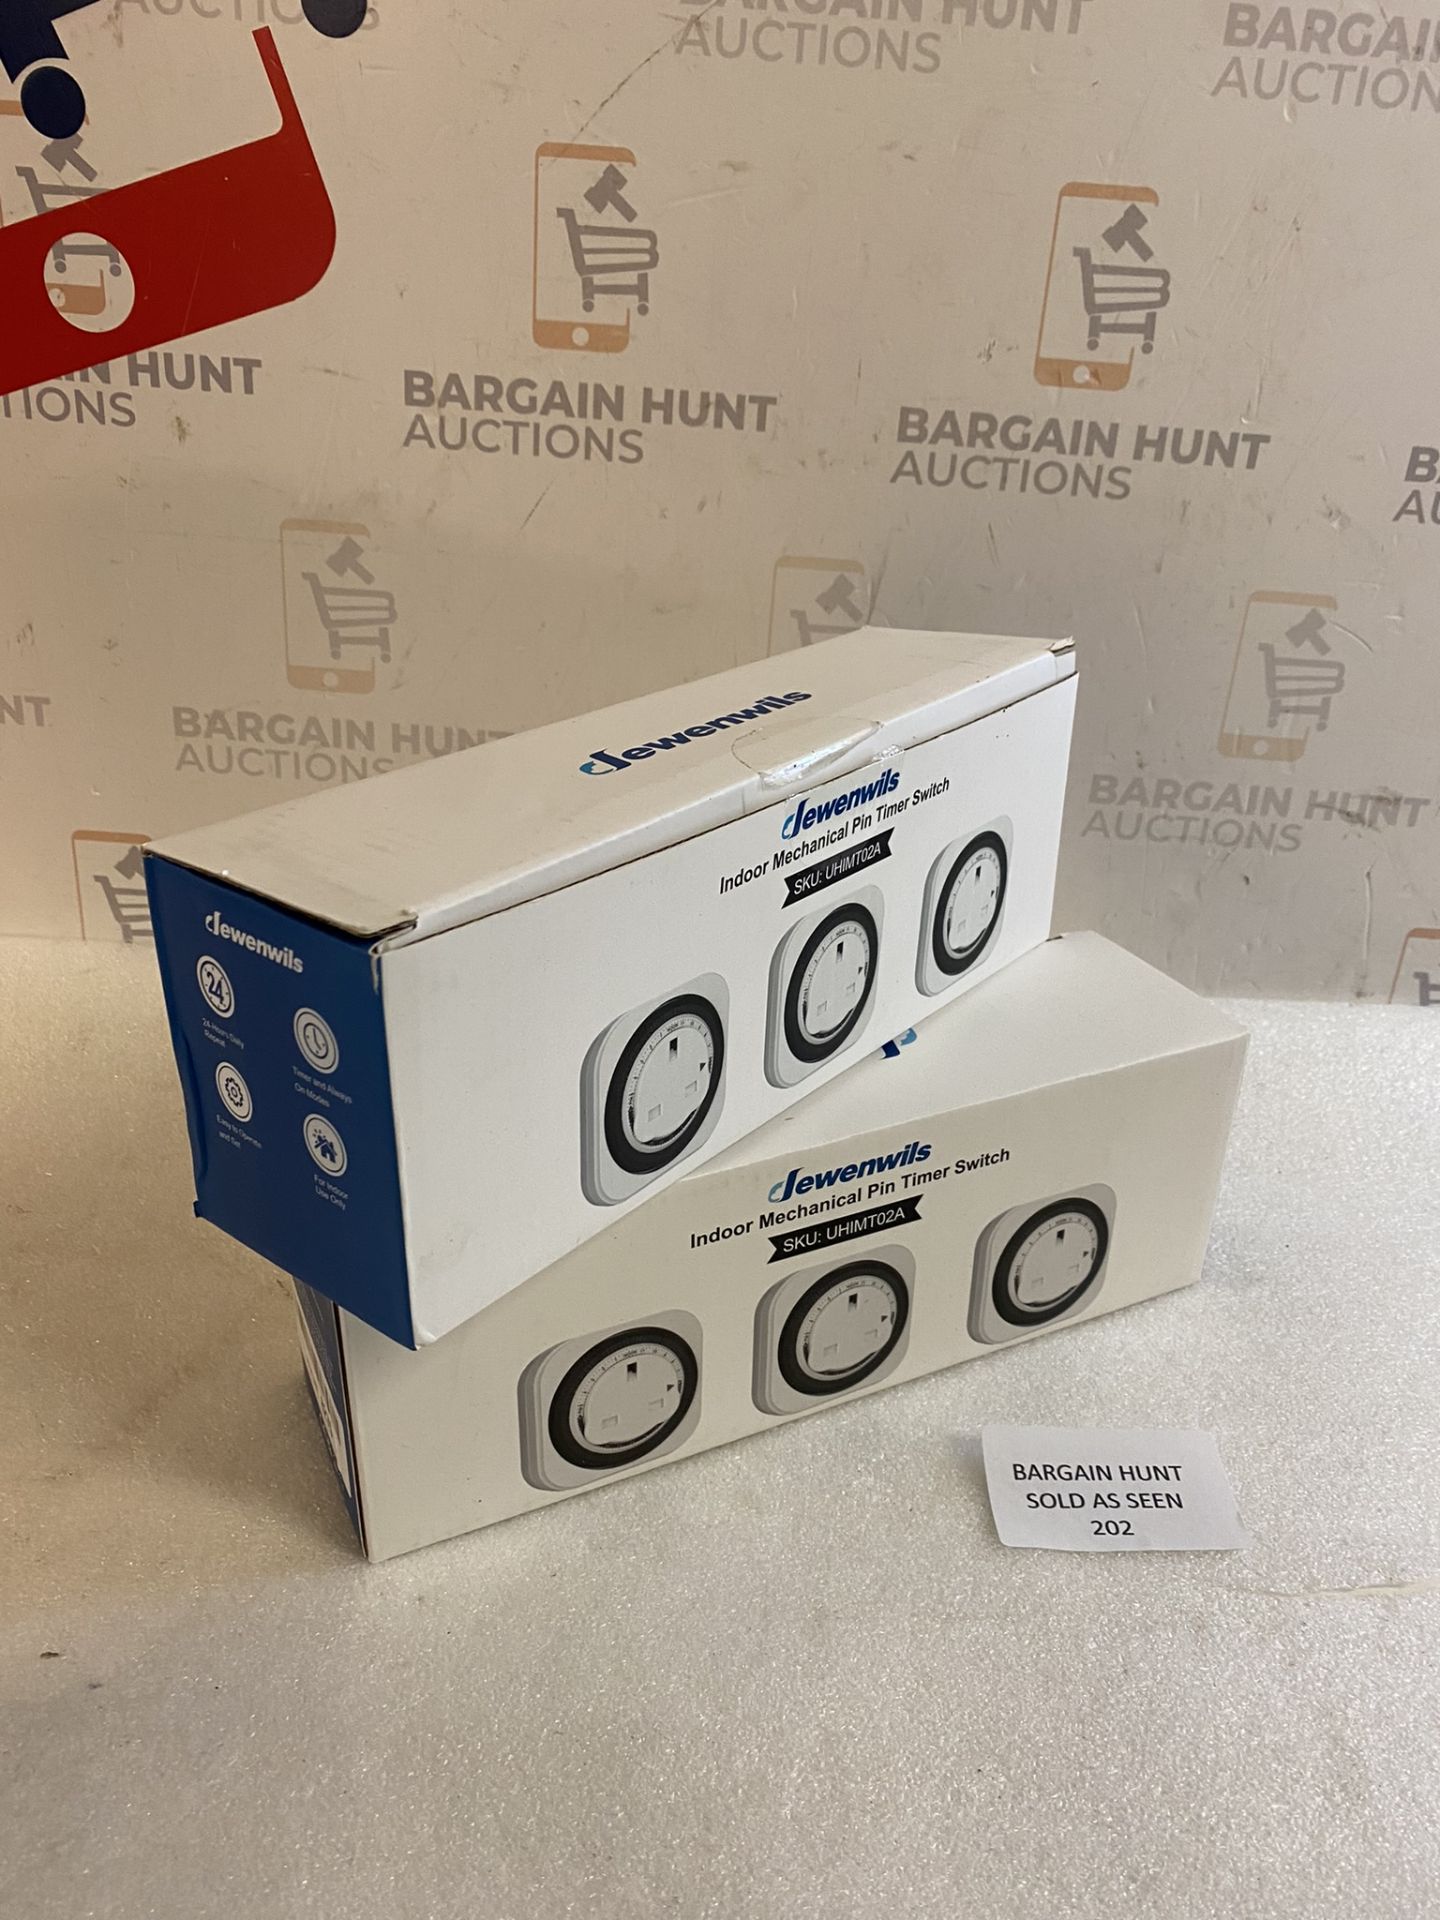 RRP £32 Set of 2 x Dewenwils 3-pack Indoor Timer Socket Switch Programmable Energy Saving Timer - Image 2 of 2